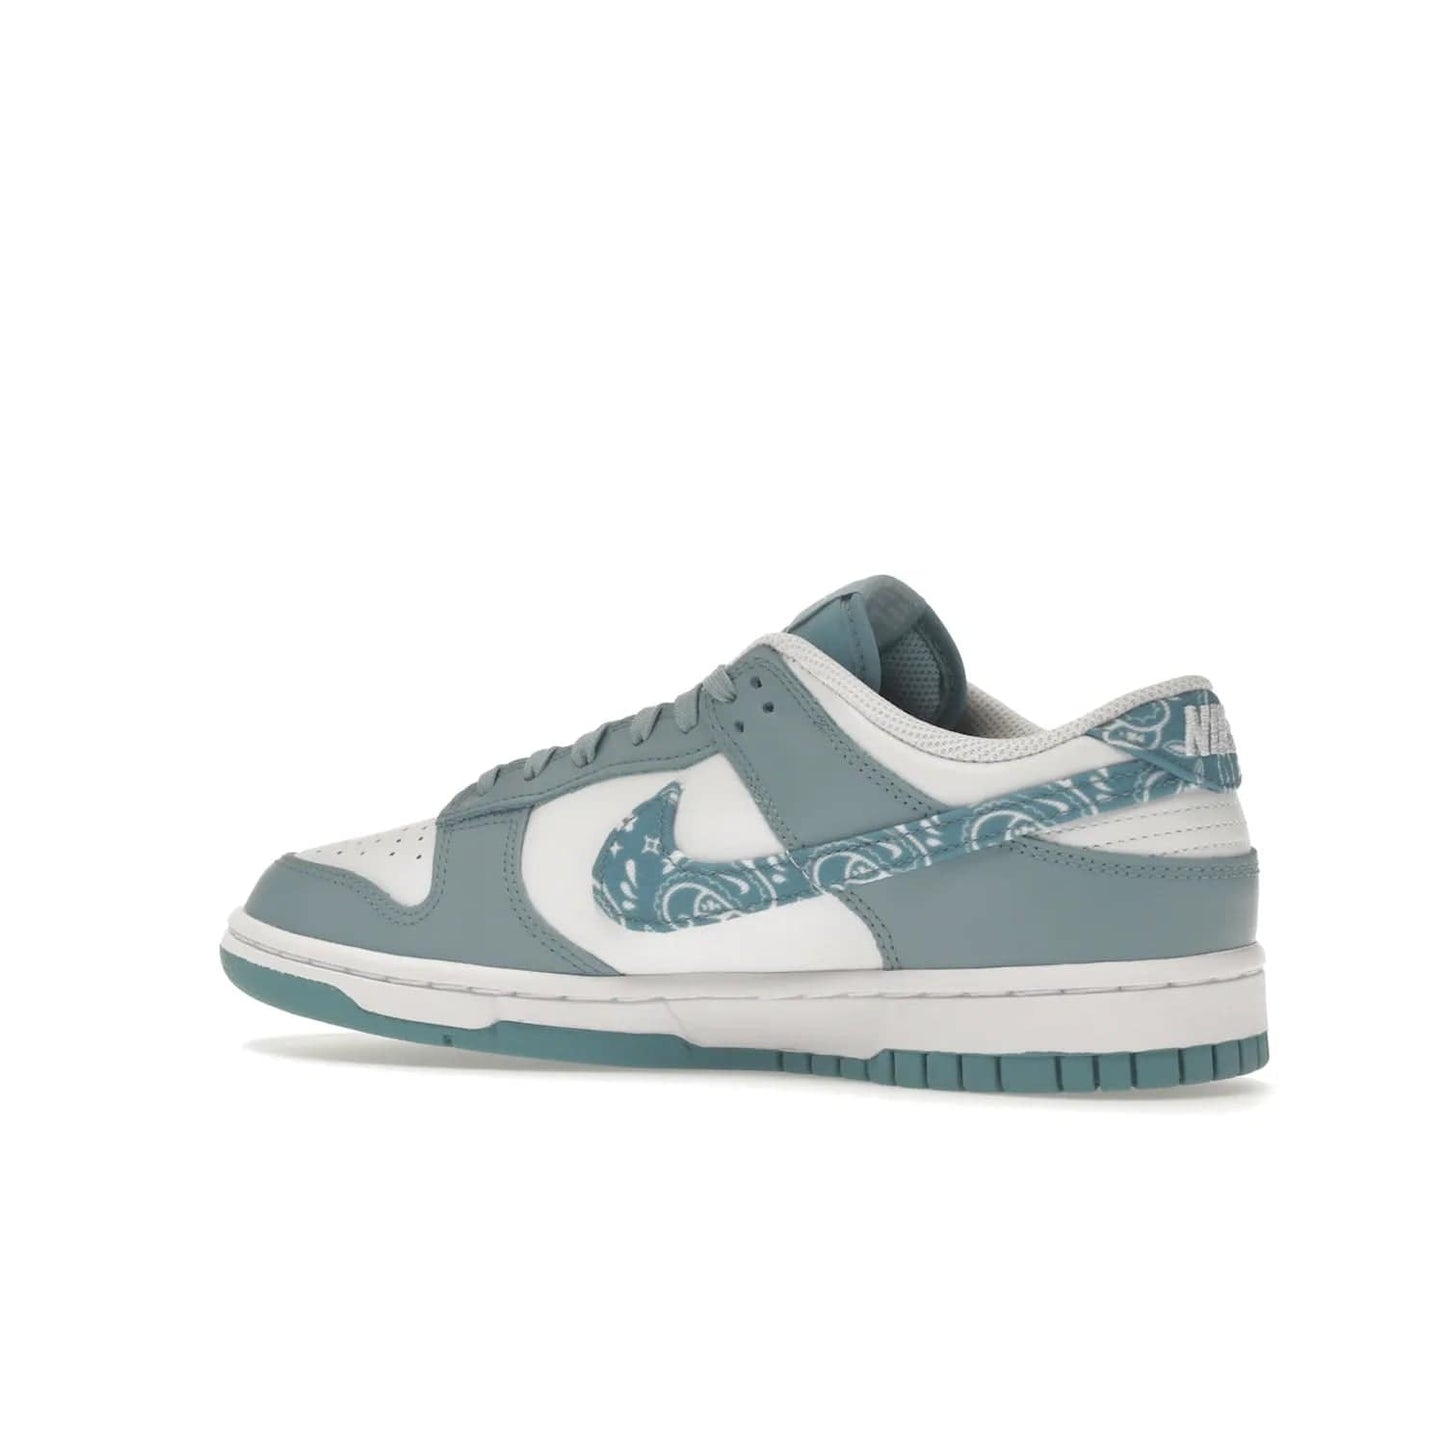 Nike Dunk Low Essential Paisley Pack Worn Blue (Women's) - Image 22 - Only at www.BallersClubKickz.com - Get the Nike Dunk Low Essential Paisley Pack Worn Blue (Women's) for style and comfort. White leather construction, light blue leather overlays, canvas Swooshes and matching heel tabs offer a rich blue hue. Finished by a white and light blue sole, this classic Nike Dunk is the perfect addition to any wardrobe. Released in March 2022.